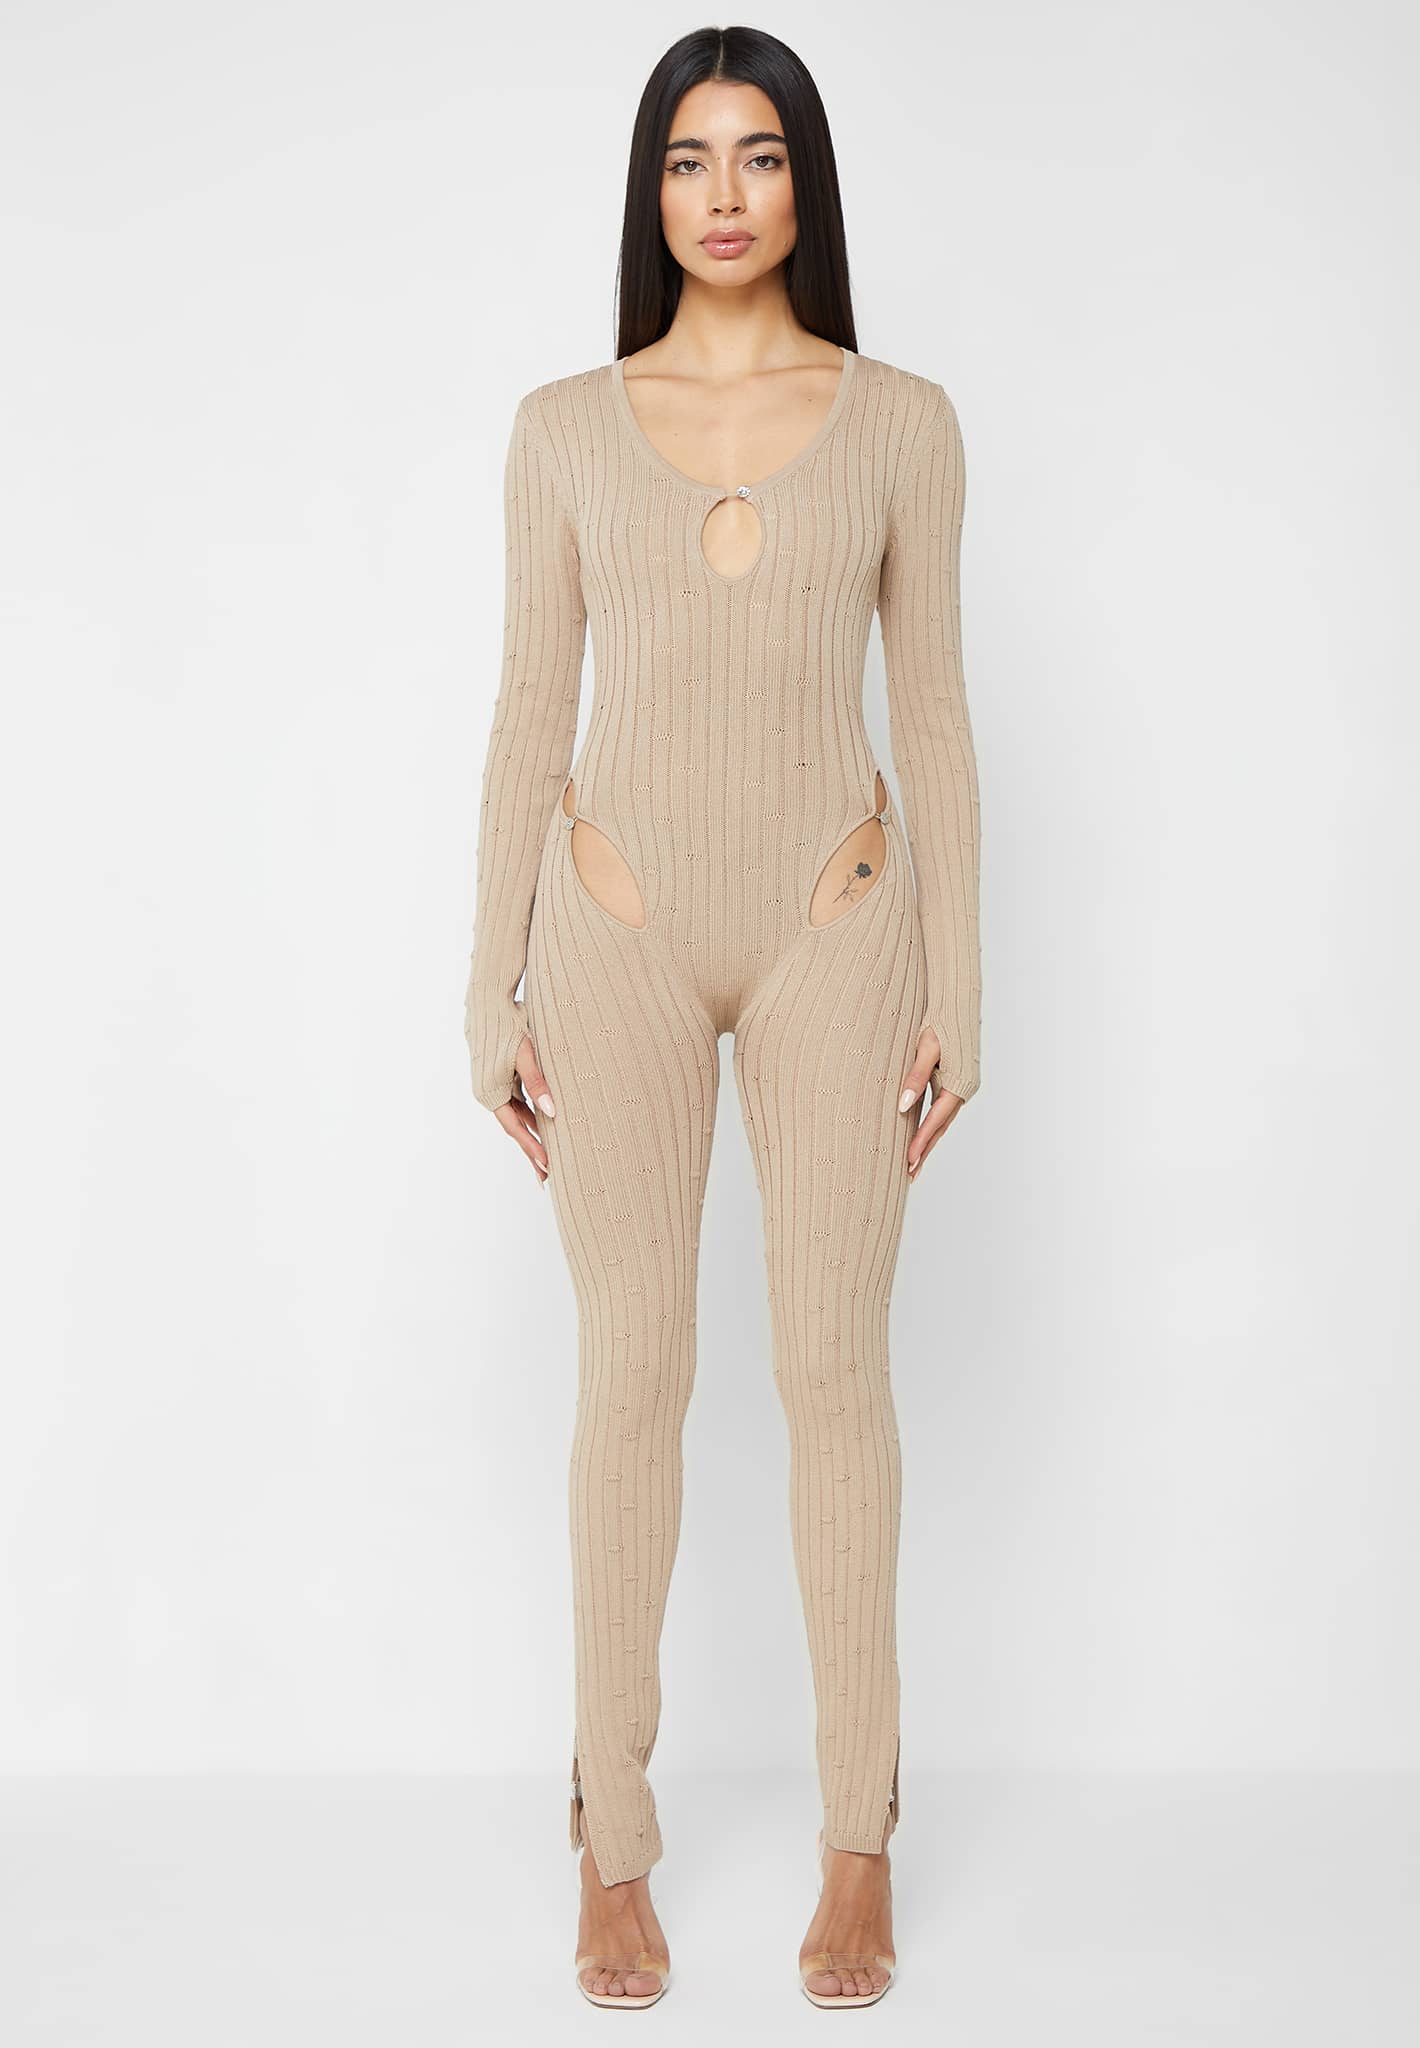 Distressed Knitted Cut Out Jumpsuit - Taupe